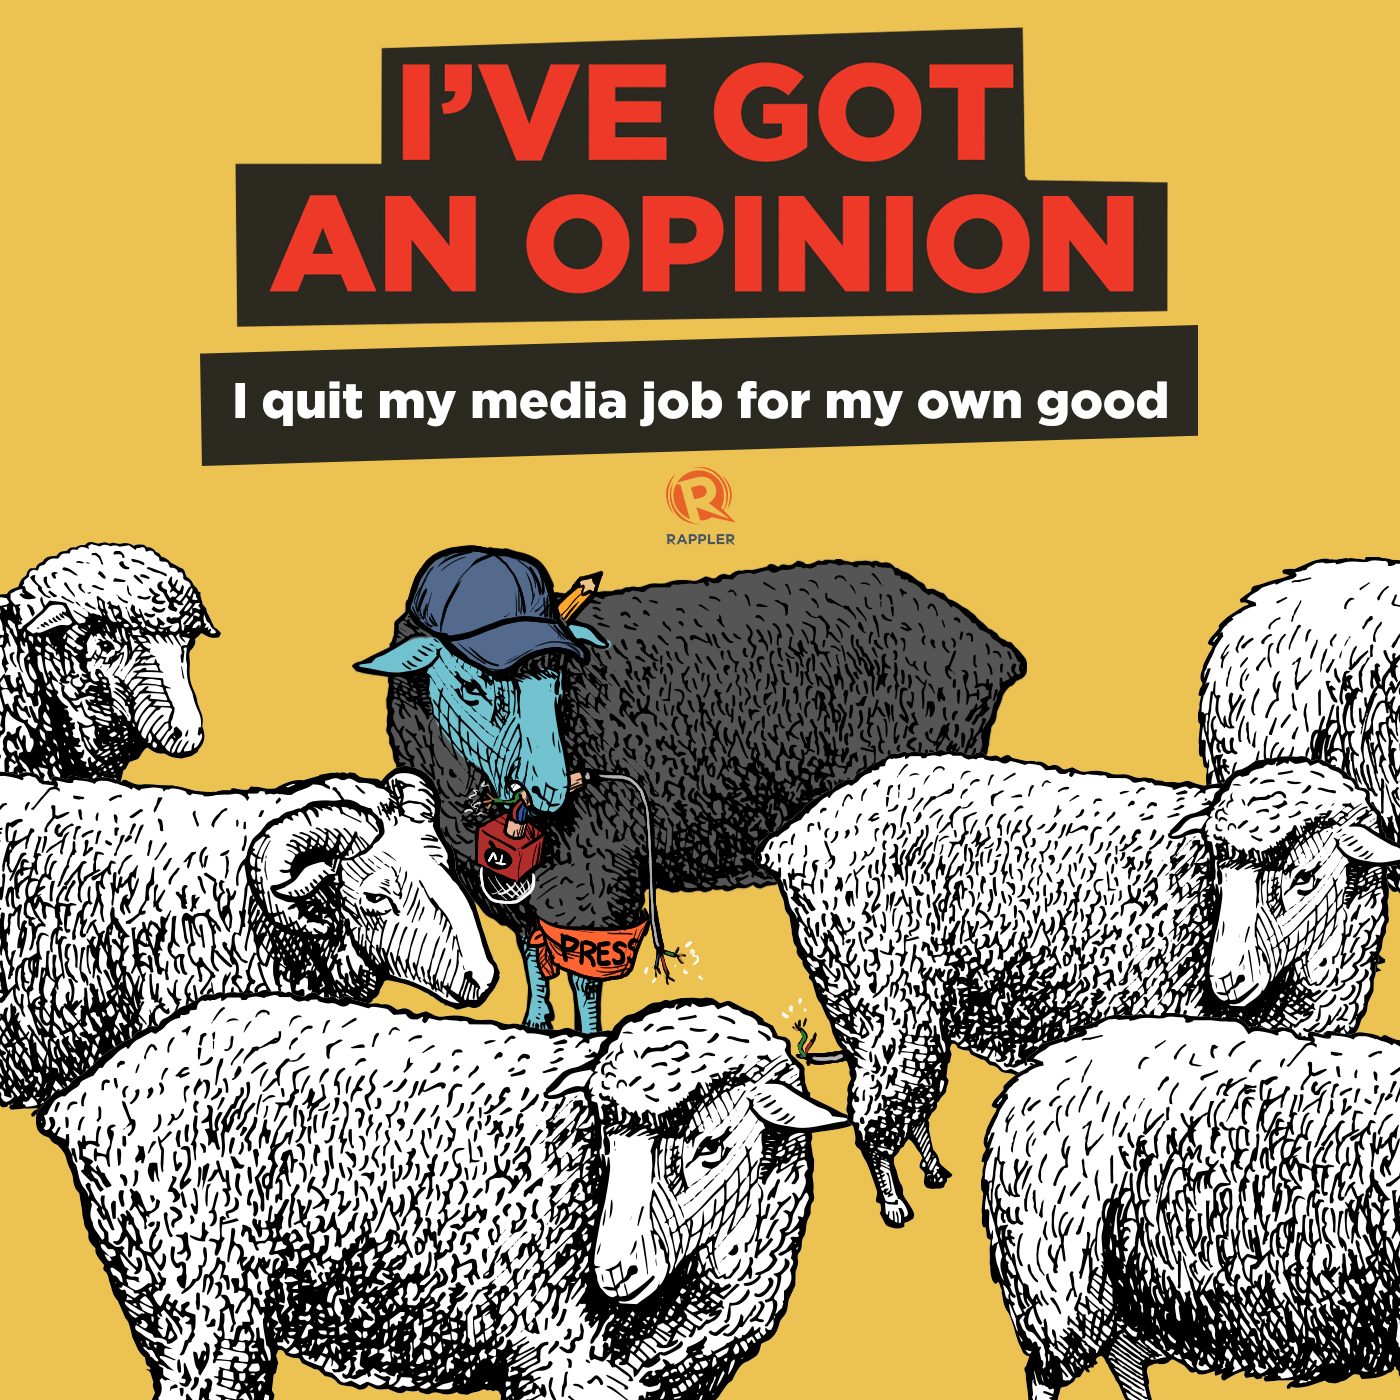 [PODCAST] I’ve Got An Opinion: I quit my media job for my own good